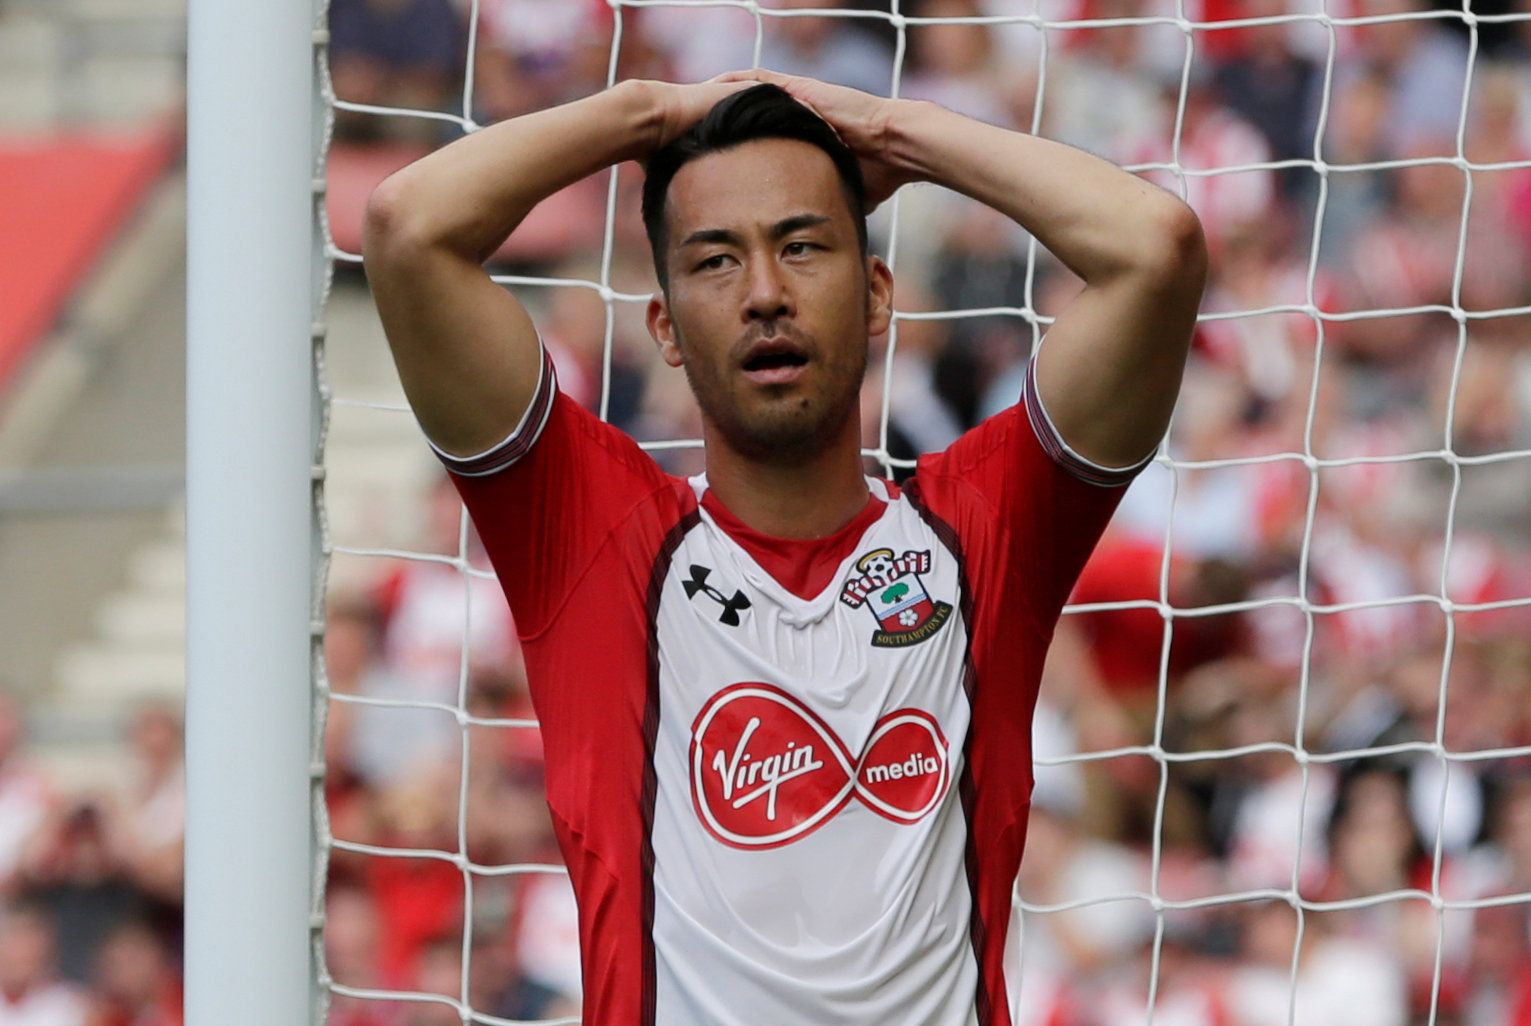 Football Soccer - Premier League - Southampton vs Swansea City - Southampton, Britain - August 12, 2017   Southampton's Maya Yoshida looks dejected after missing a chance to score   Action Images via Reuters/Henry Browne  EDITORIAL USE ONLY. No use with unauthorized audio, video, data, fixture lists, club/league logos or 